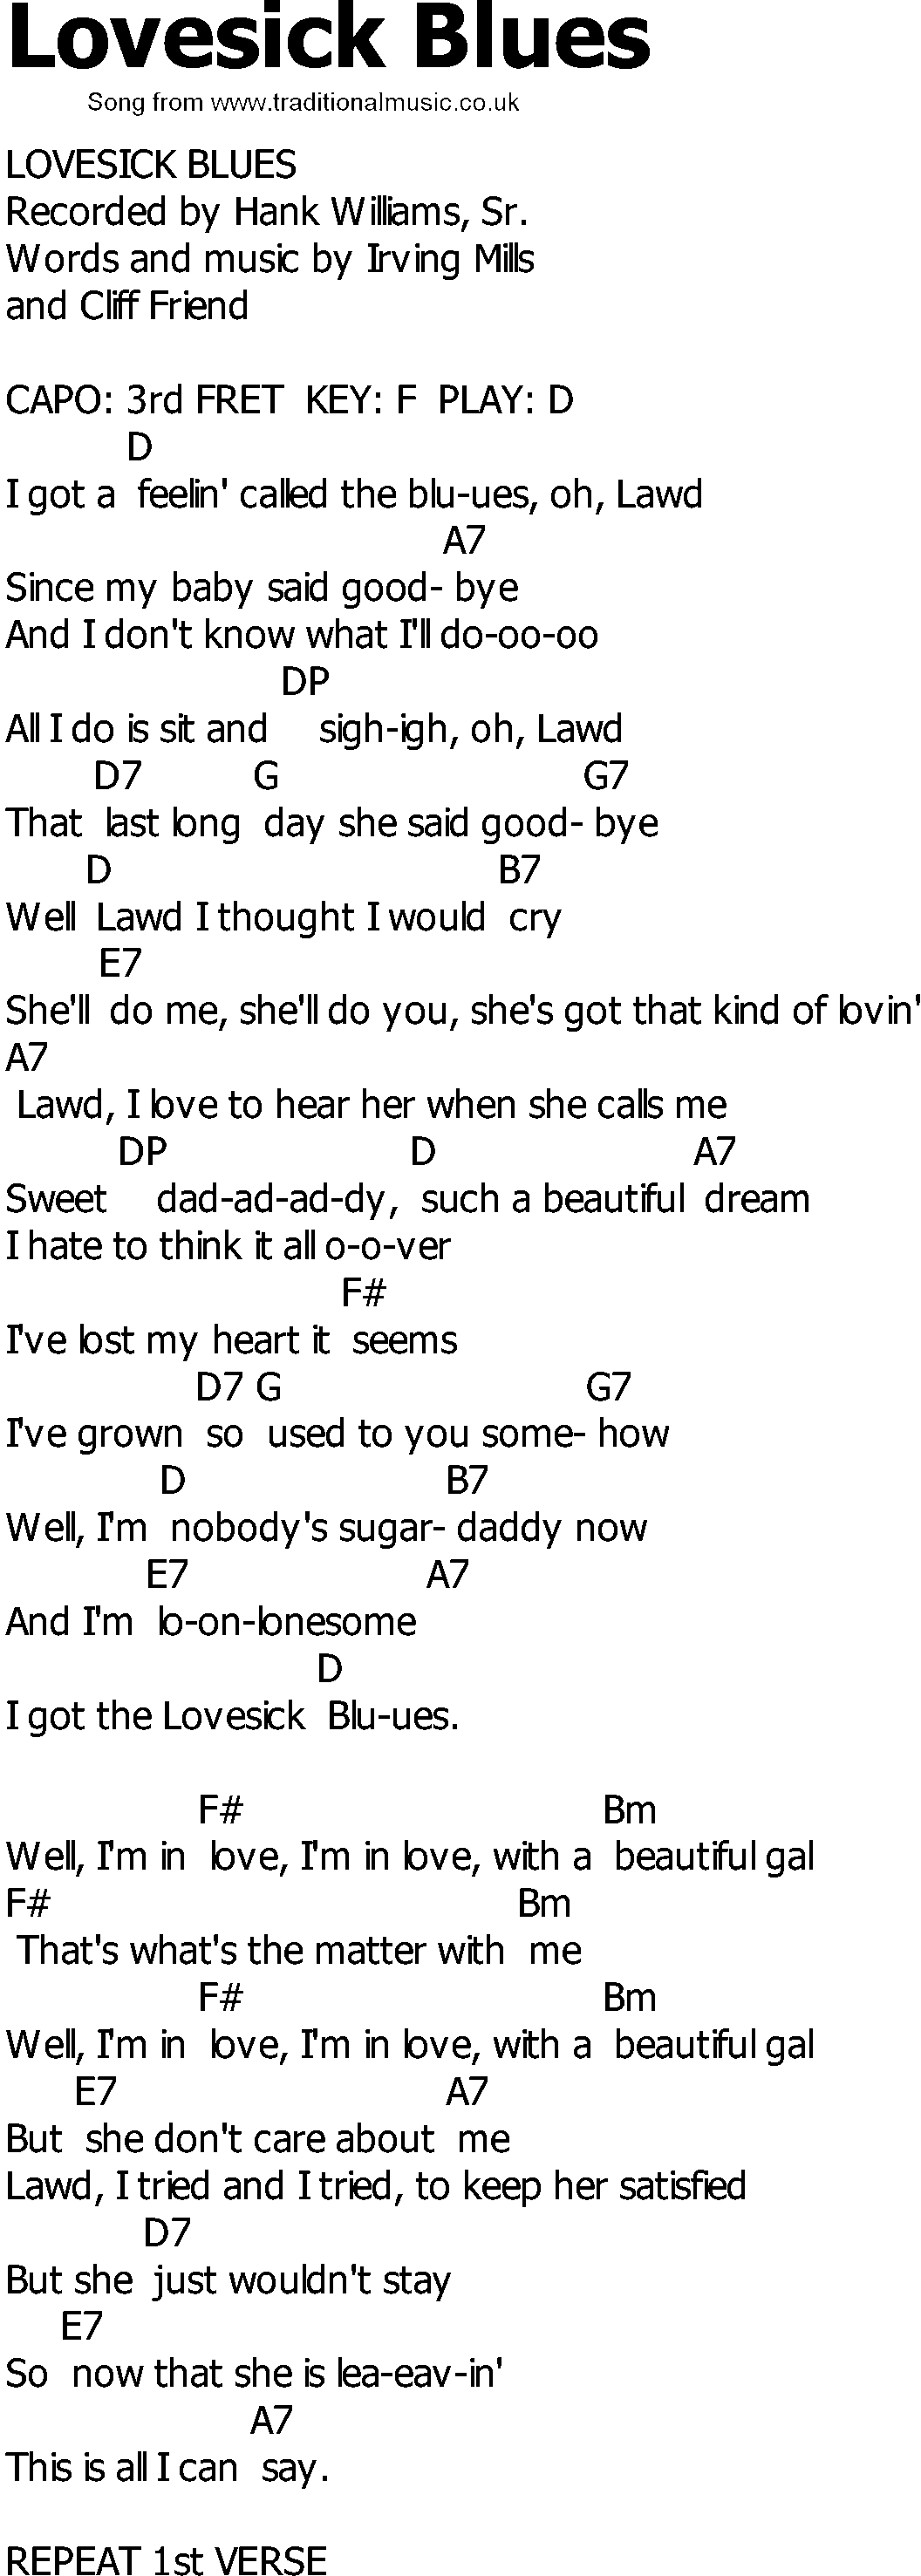 Old Country song lyrics with chords - Lovesick Blues